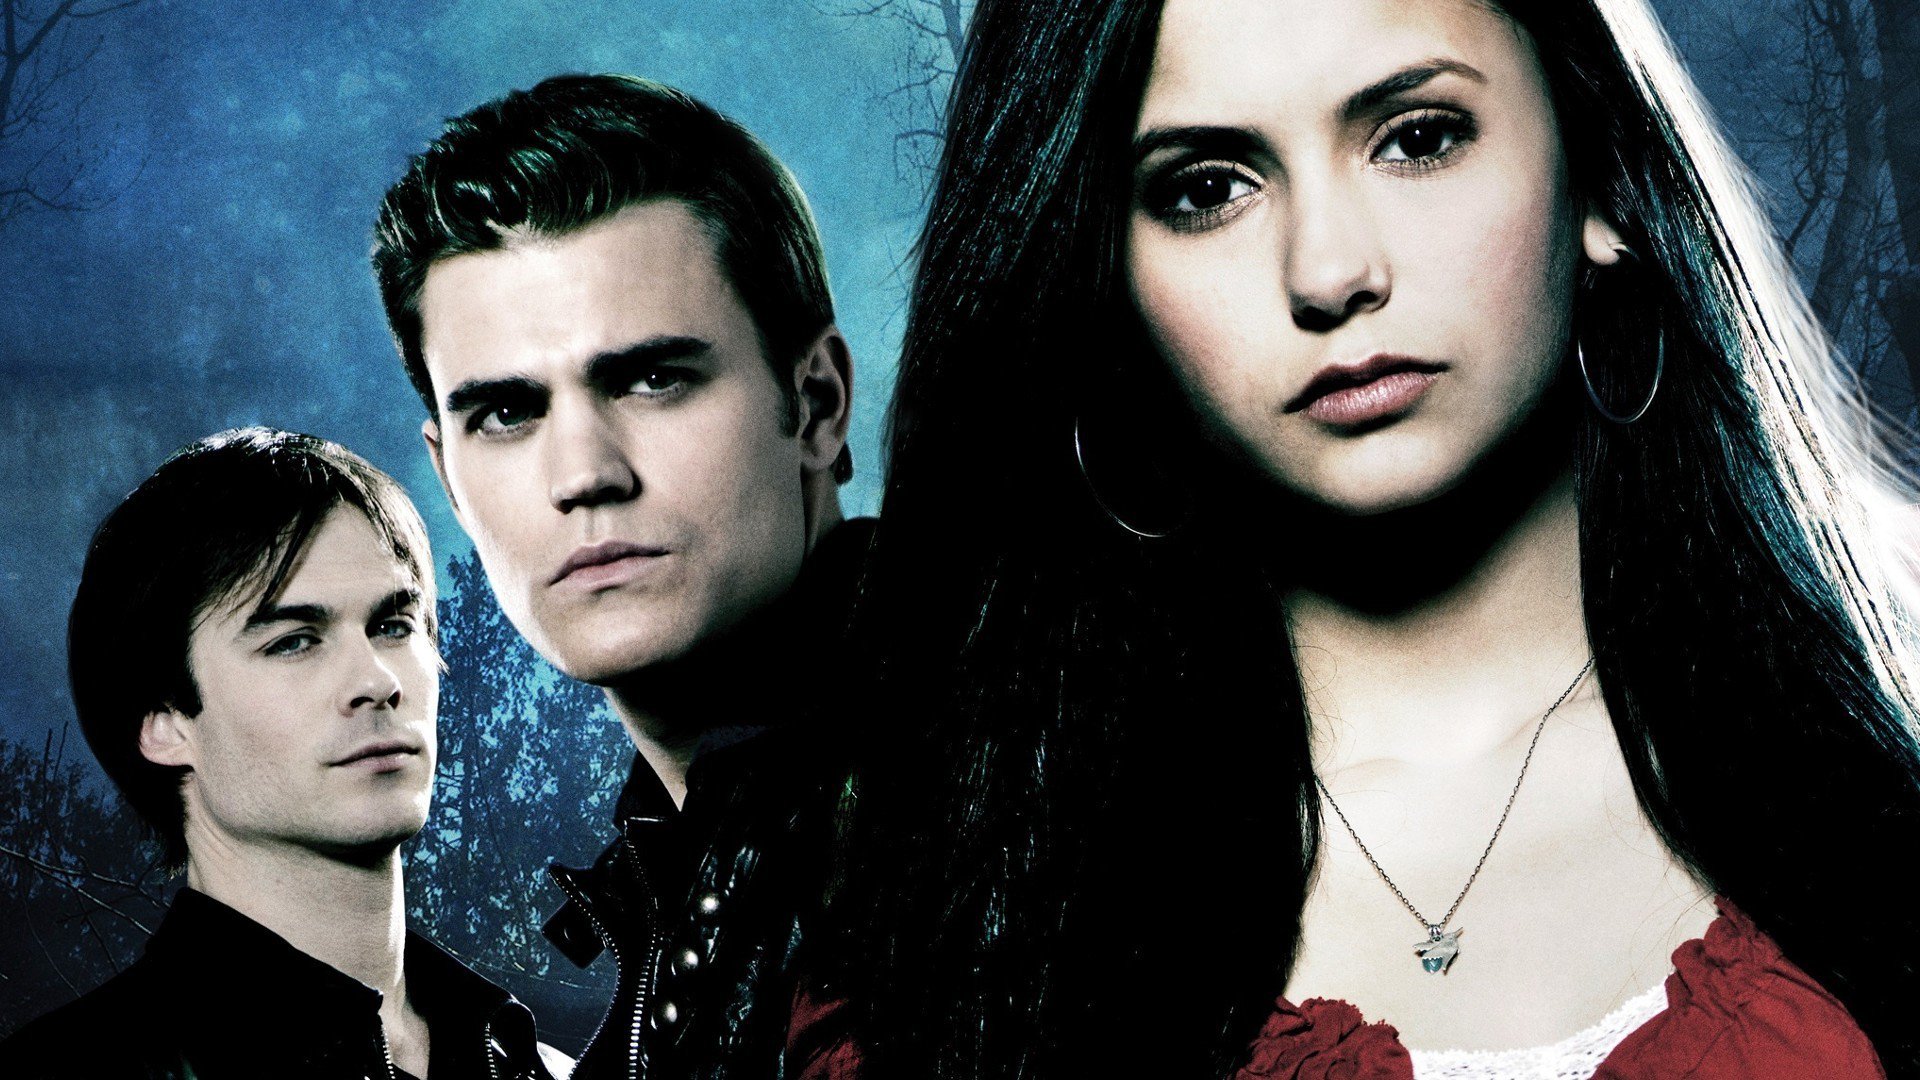  The Vampire Diaries HQ Background Images